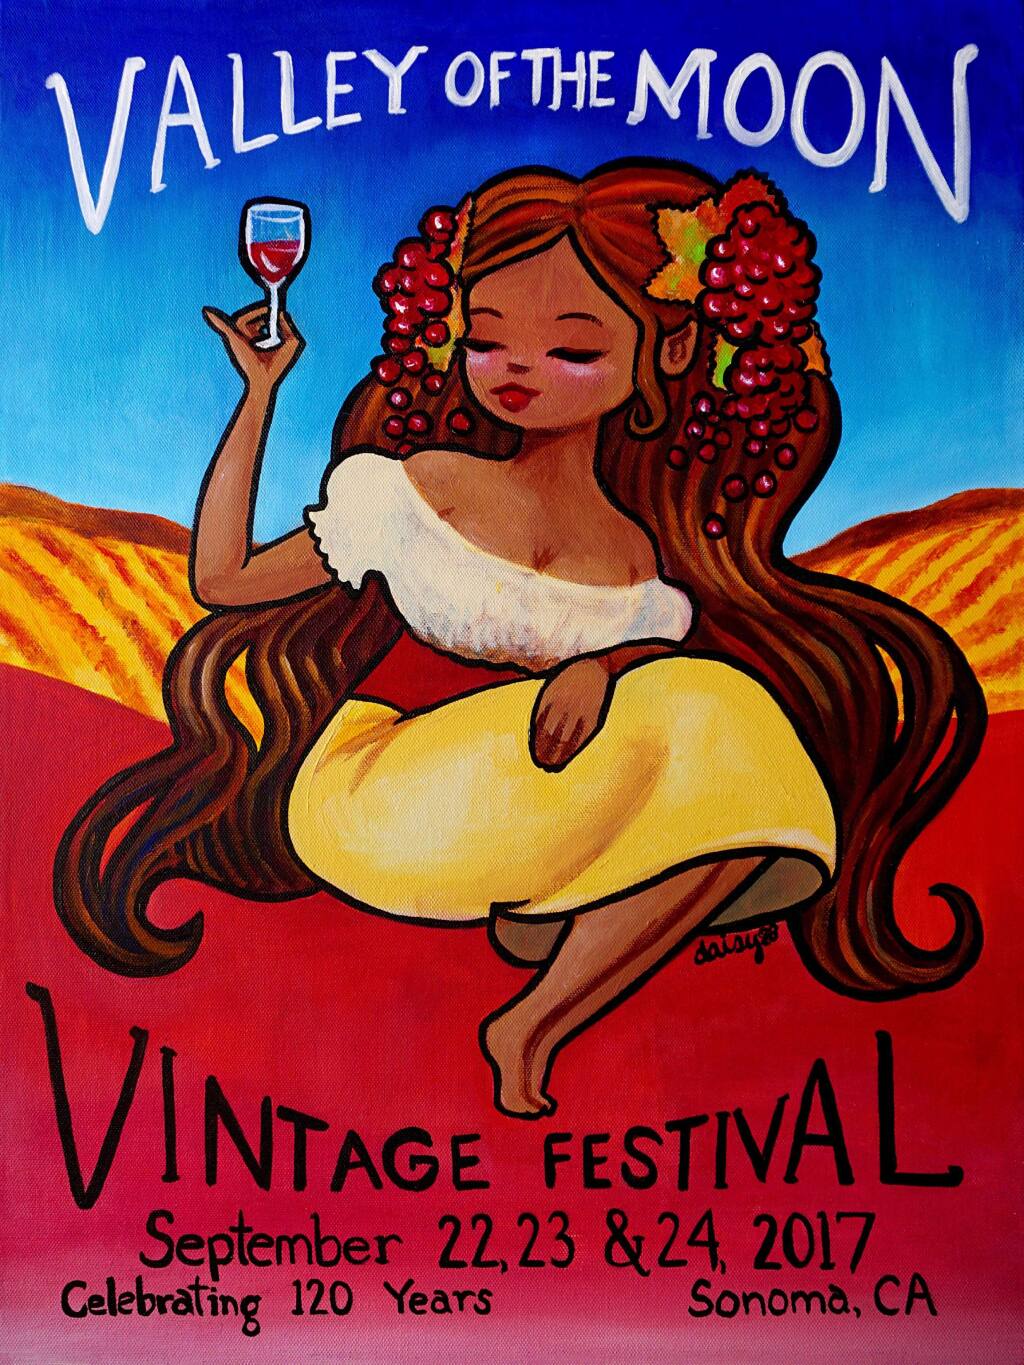 Valley of the Moon Vintage Festival poster unveiled